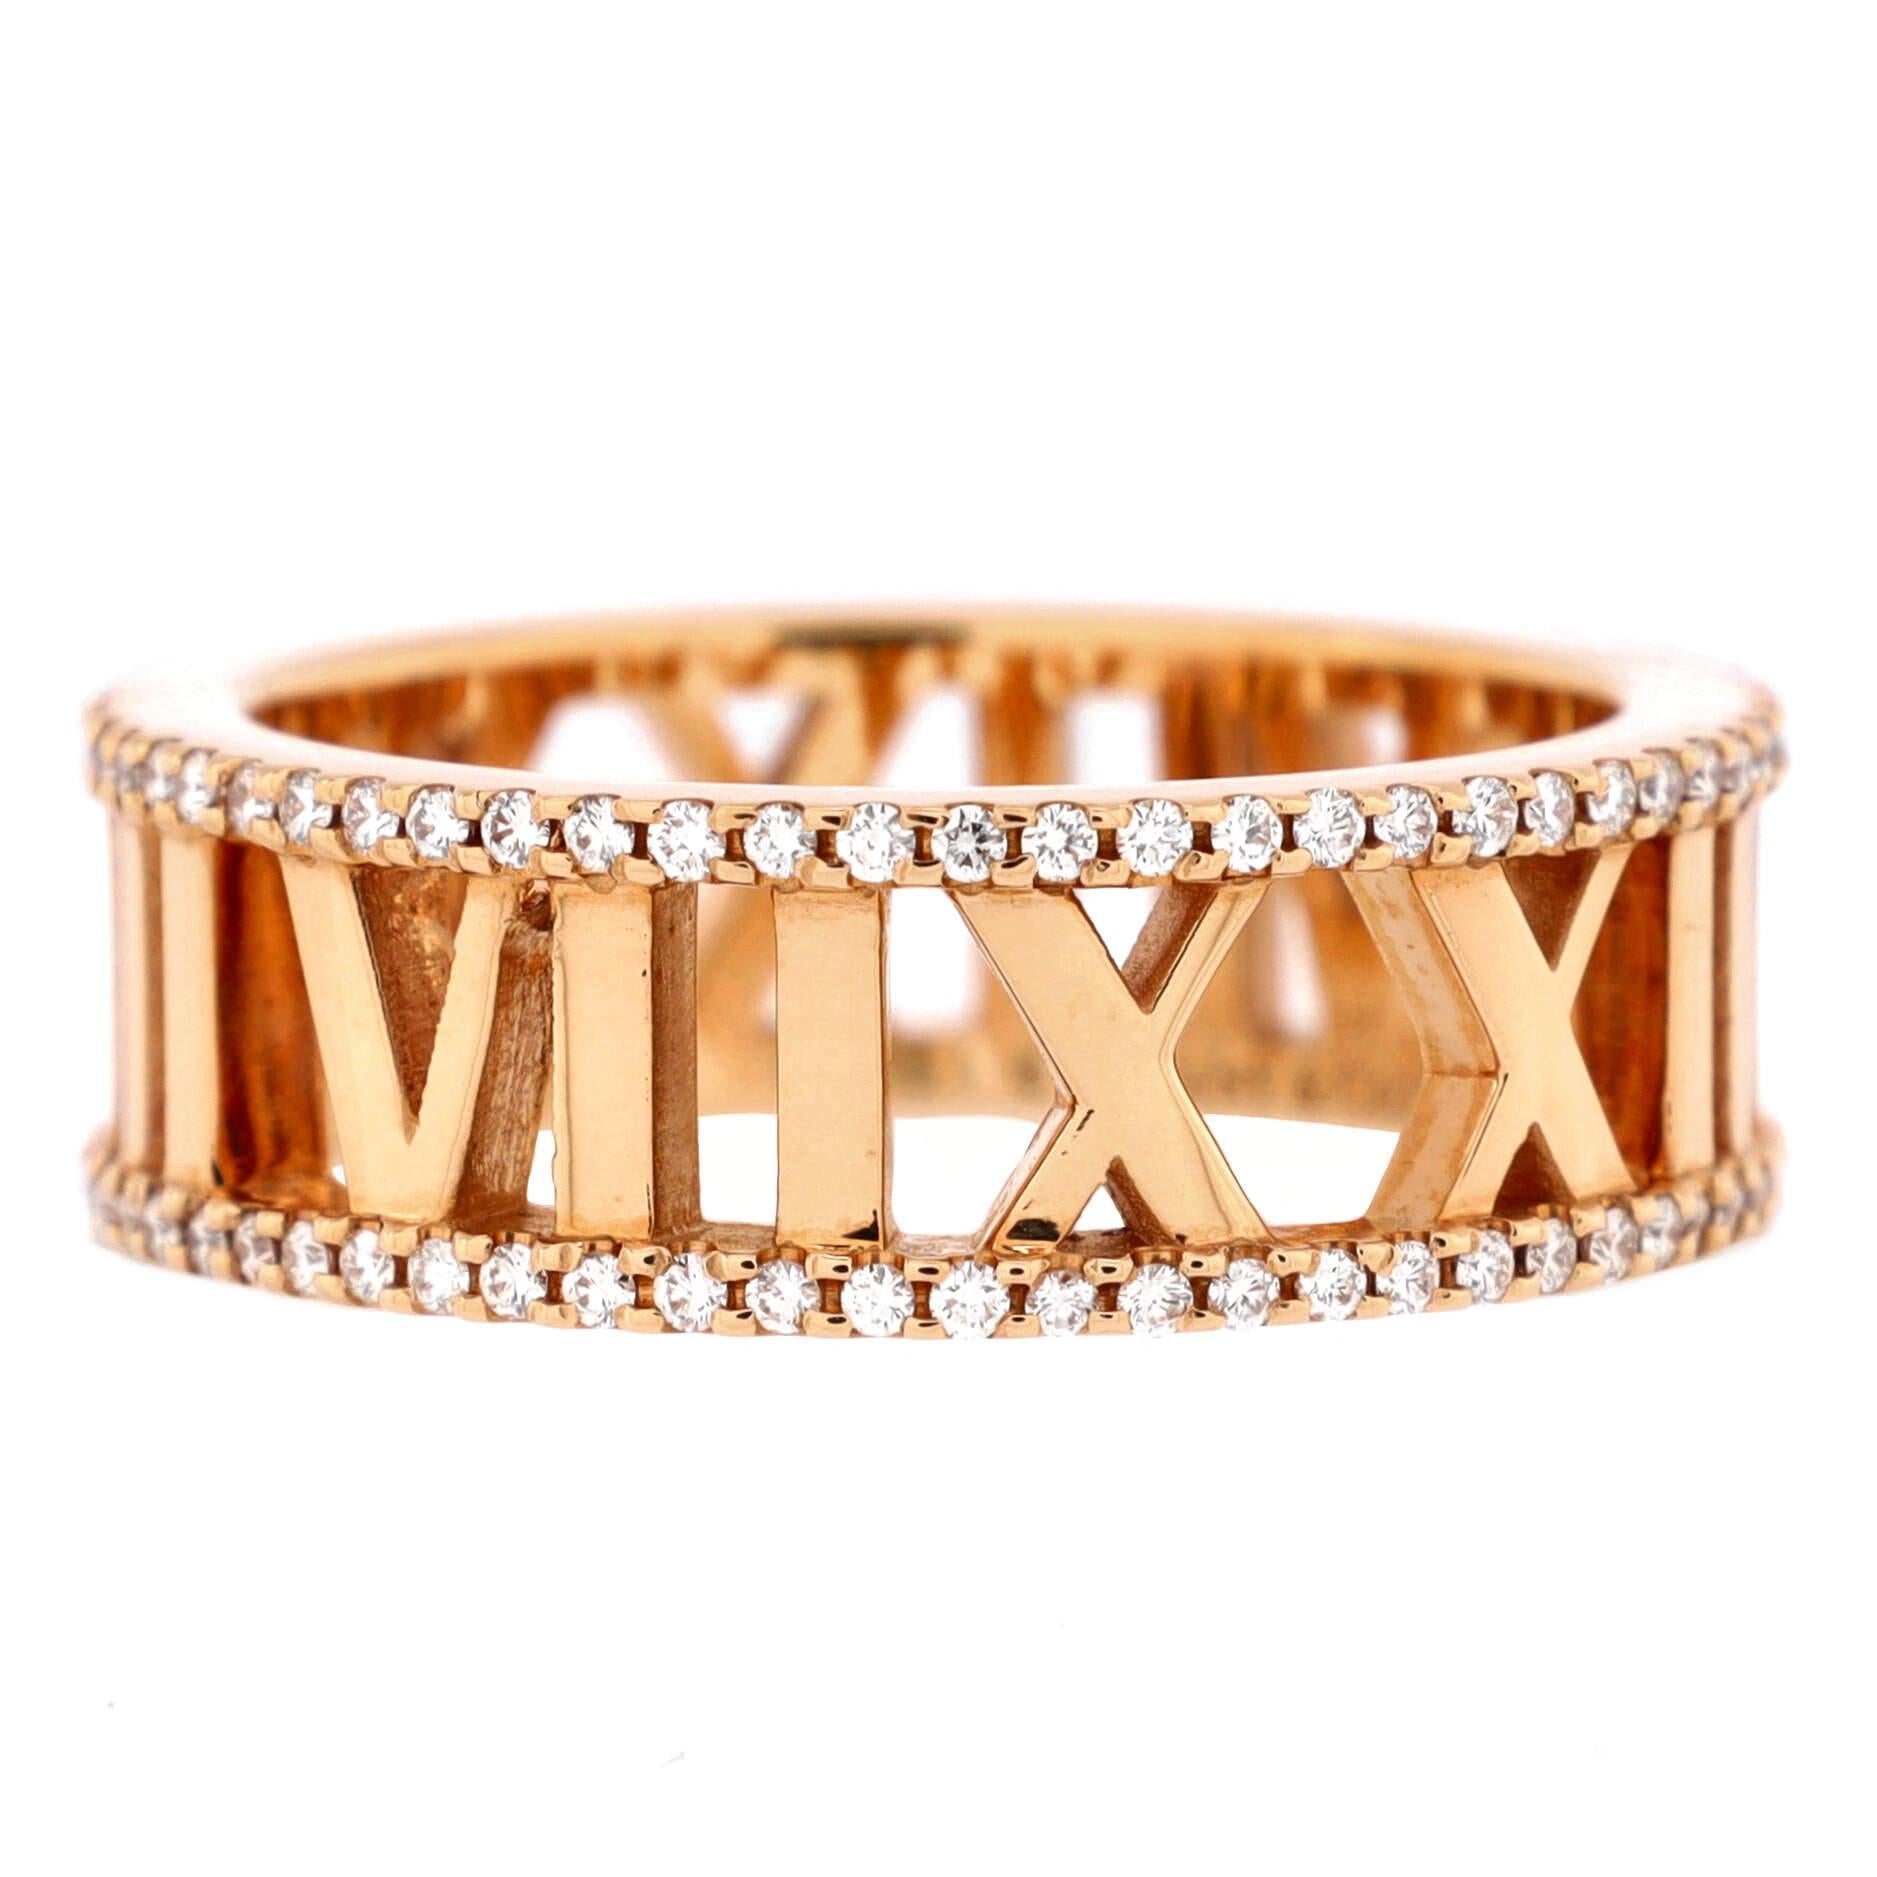 Condition: Great. Minor wear throughout.
Accessories: No Accessories
Measurements: Size: 7, Width: 7.00 mm
Designer: Tiffany & Co.
Model: Atlas Open Ring 18K Rose Gold with Diamond 7mm
Exterior Color: Rose Gold
Item Number: 211831/13